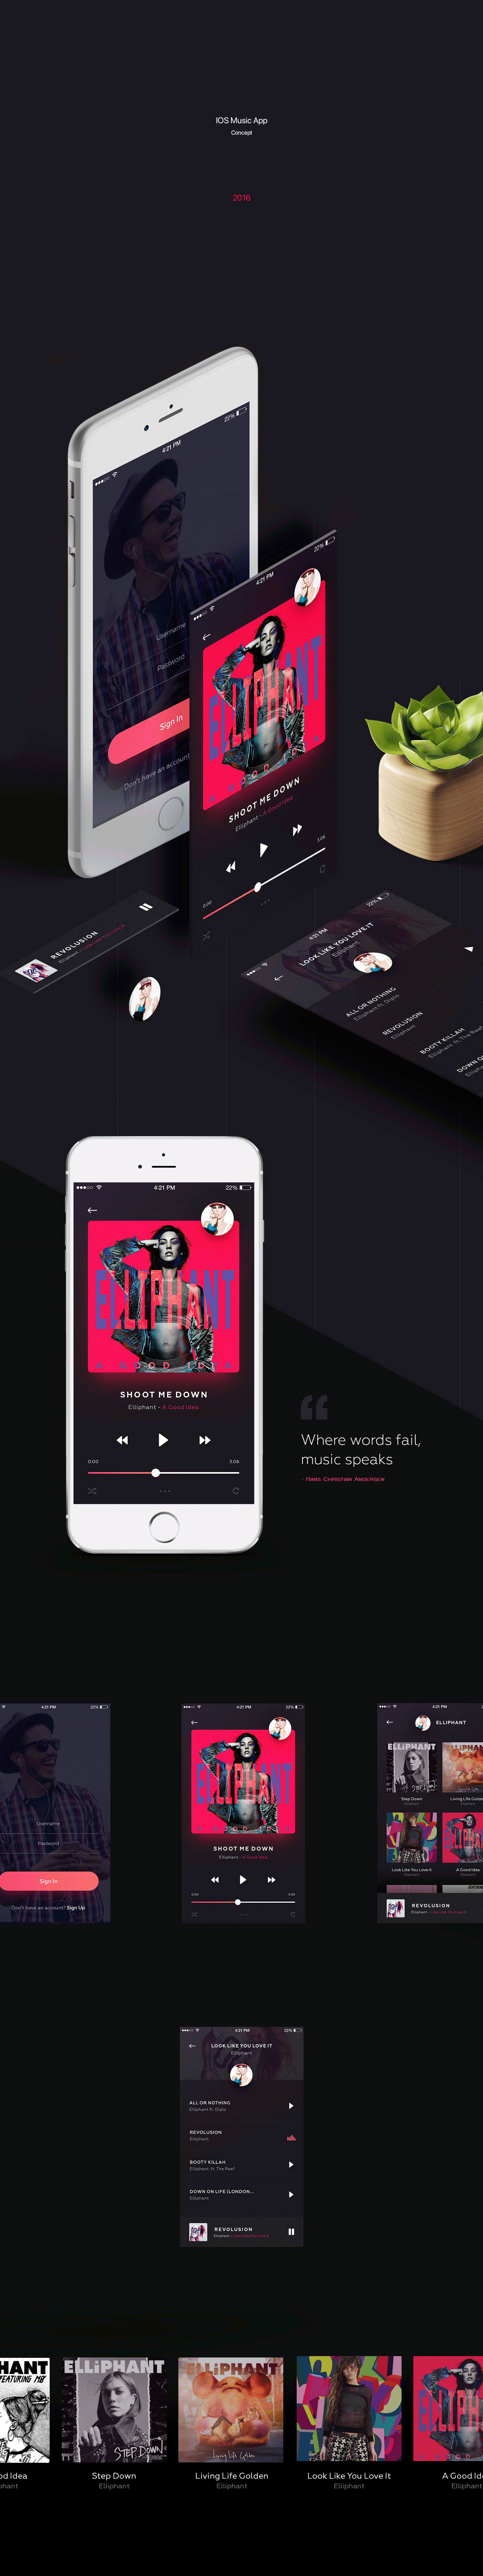 ios player music app iphone psd interaction